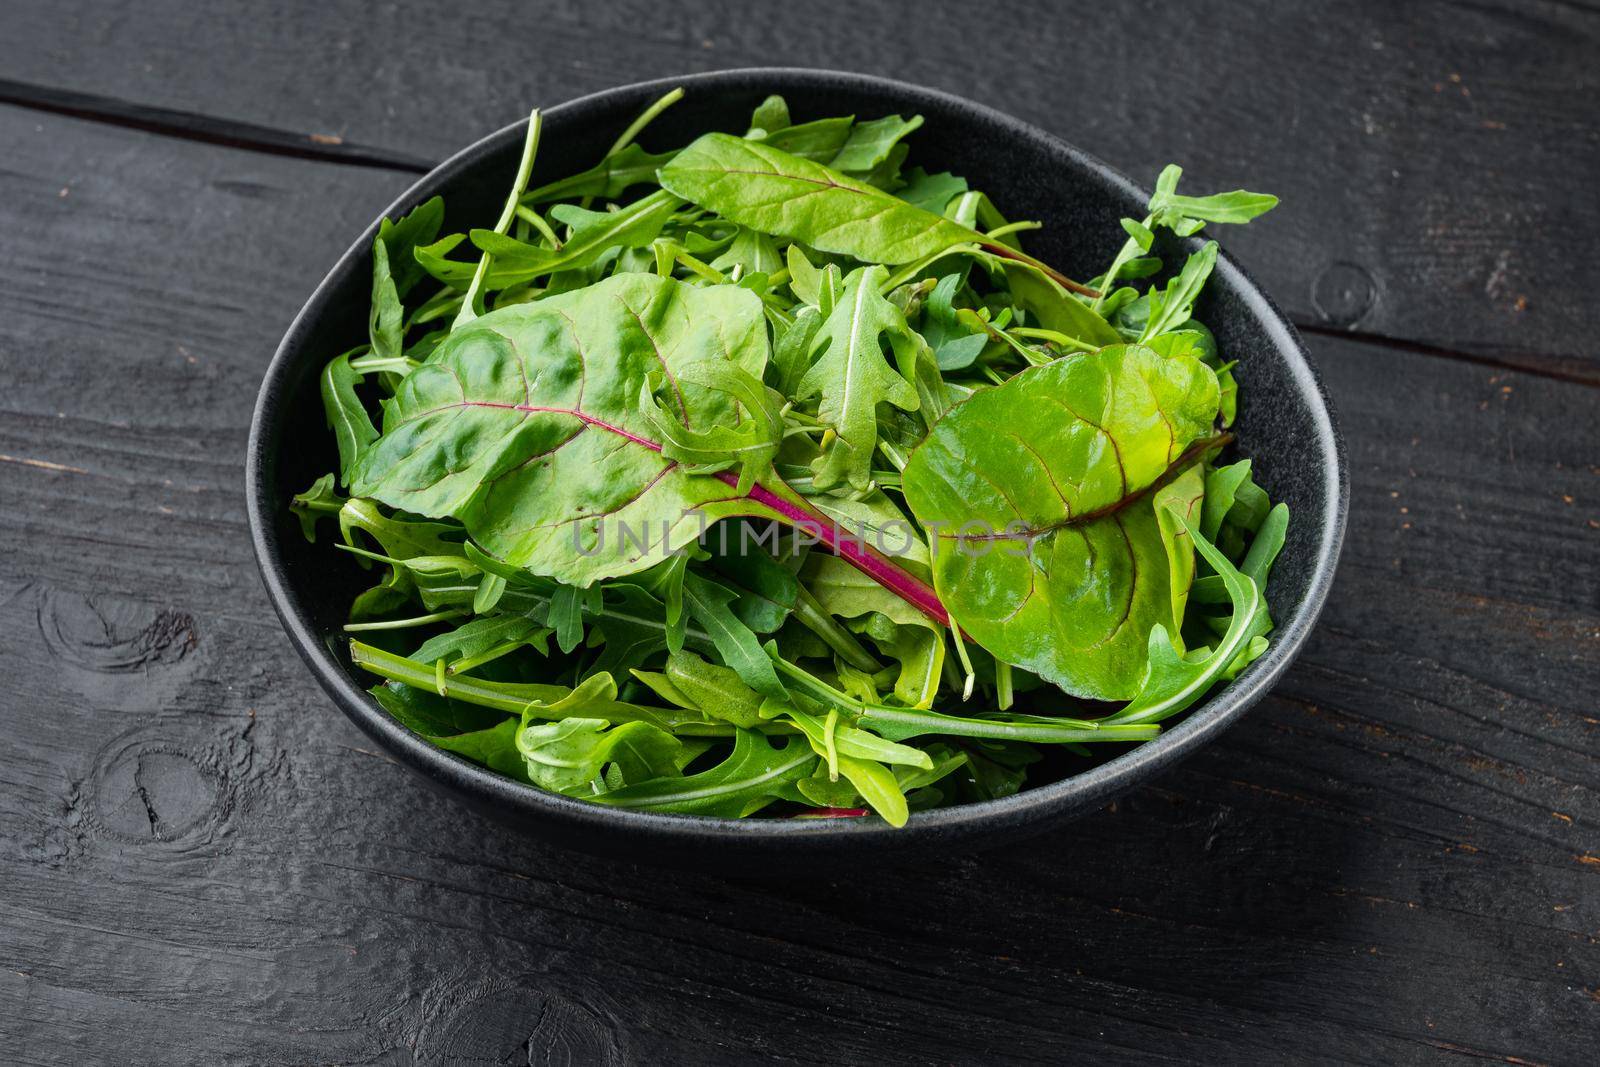 Arugula, Chard herbs mix , on black wooden table background by Ilianesolenyi